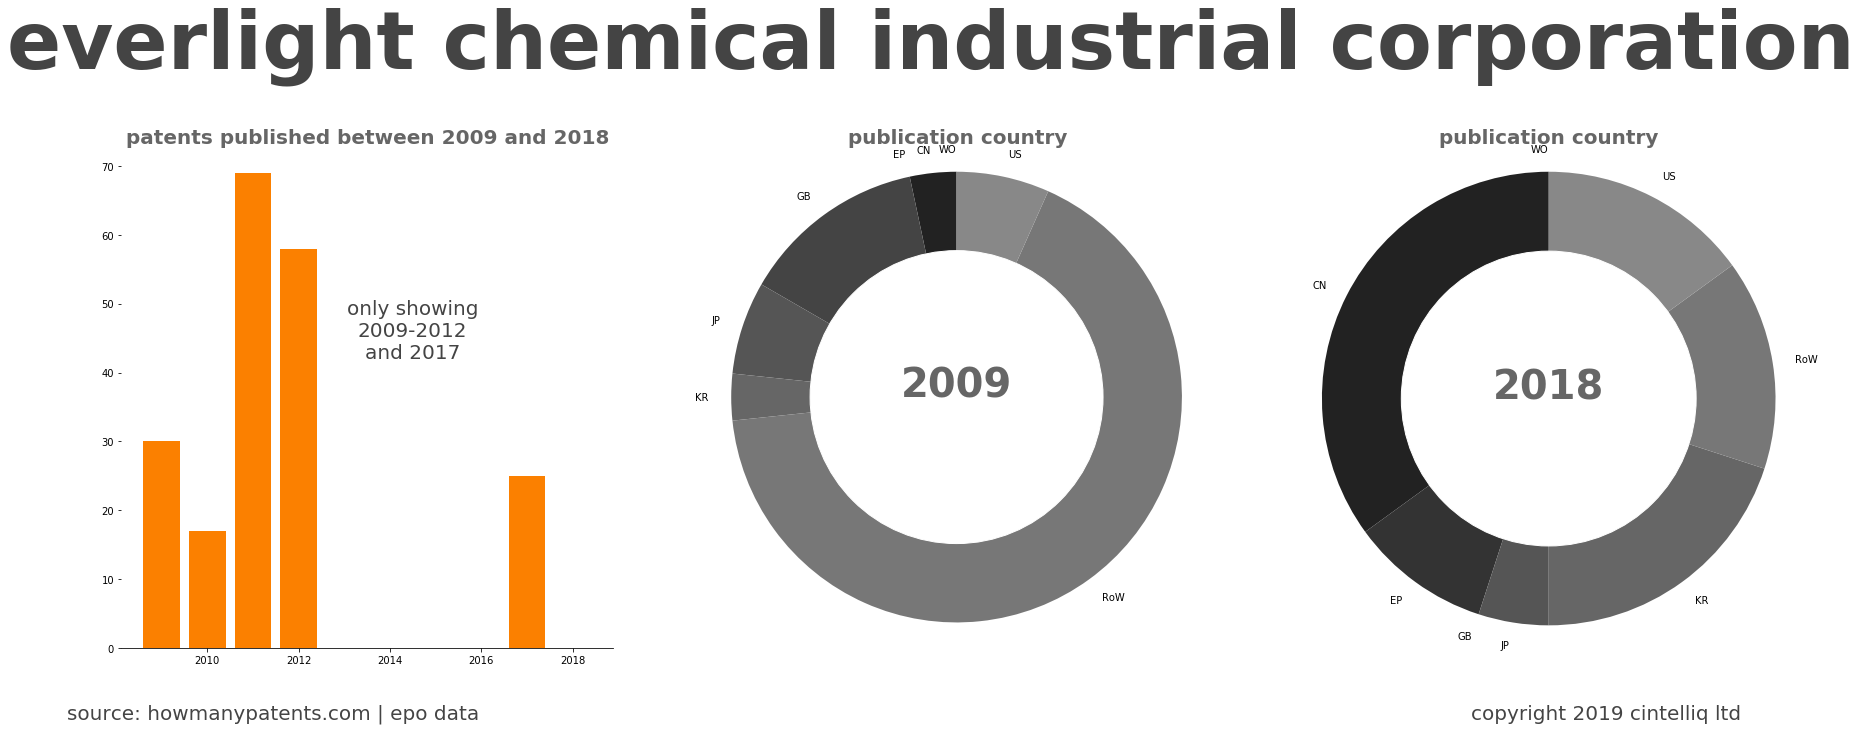 summary of patents for Everlight Chemical Industrial Corporation